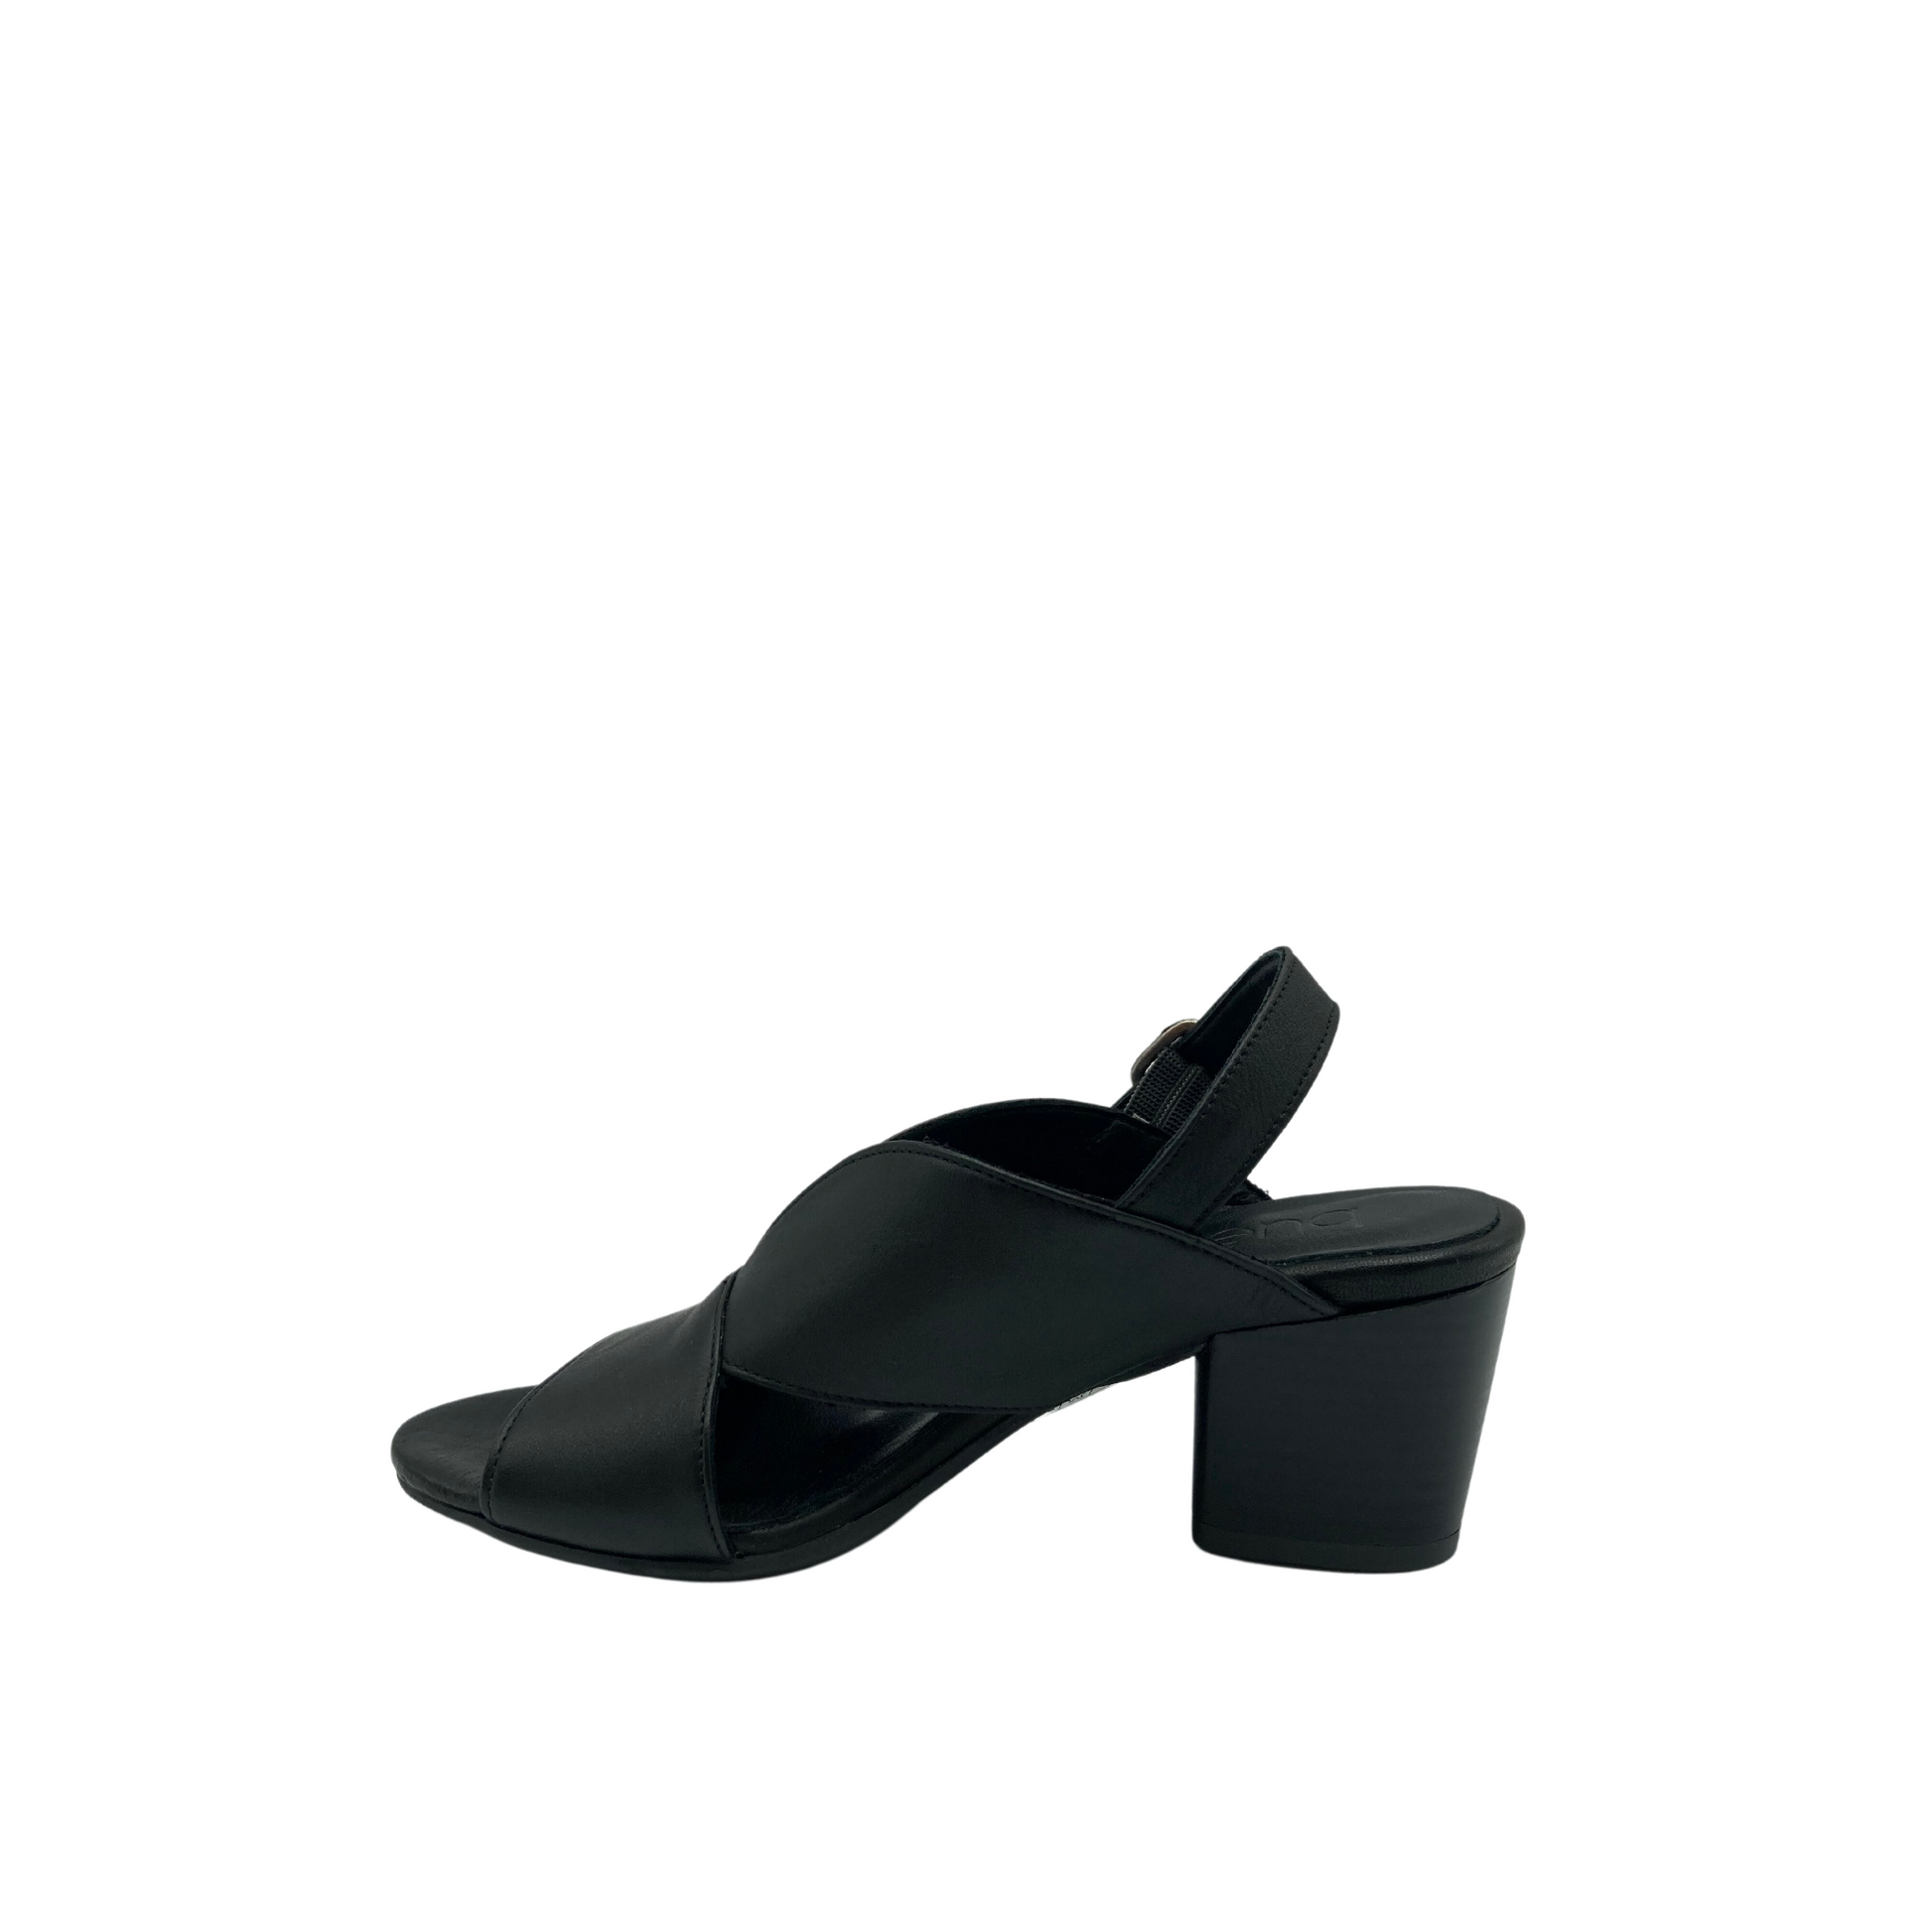 Inside view of black sandal with open toe and block heel.  Wide strap across forefoot with 2 rounded straps reachng up to top of foot.  Ankle strap with buckle adjustment